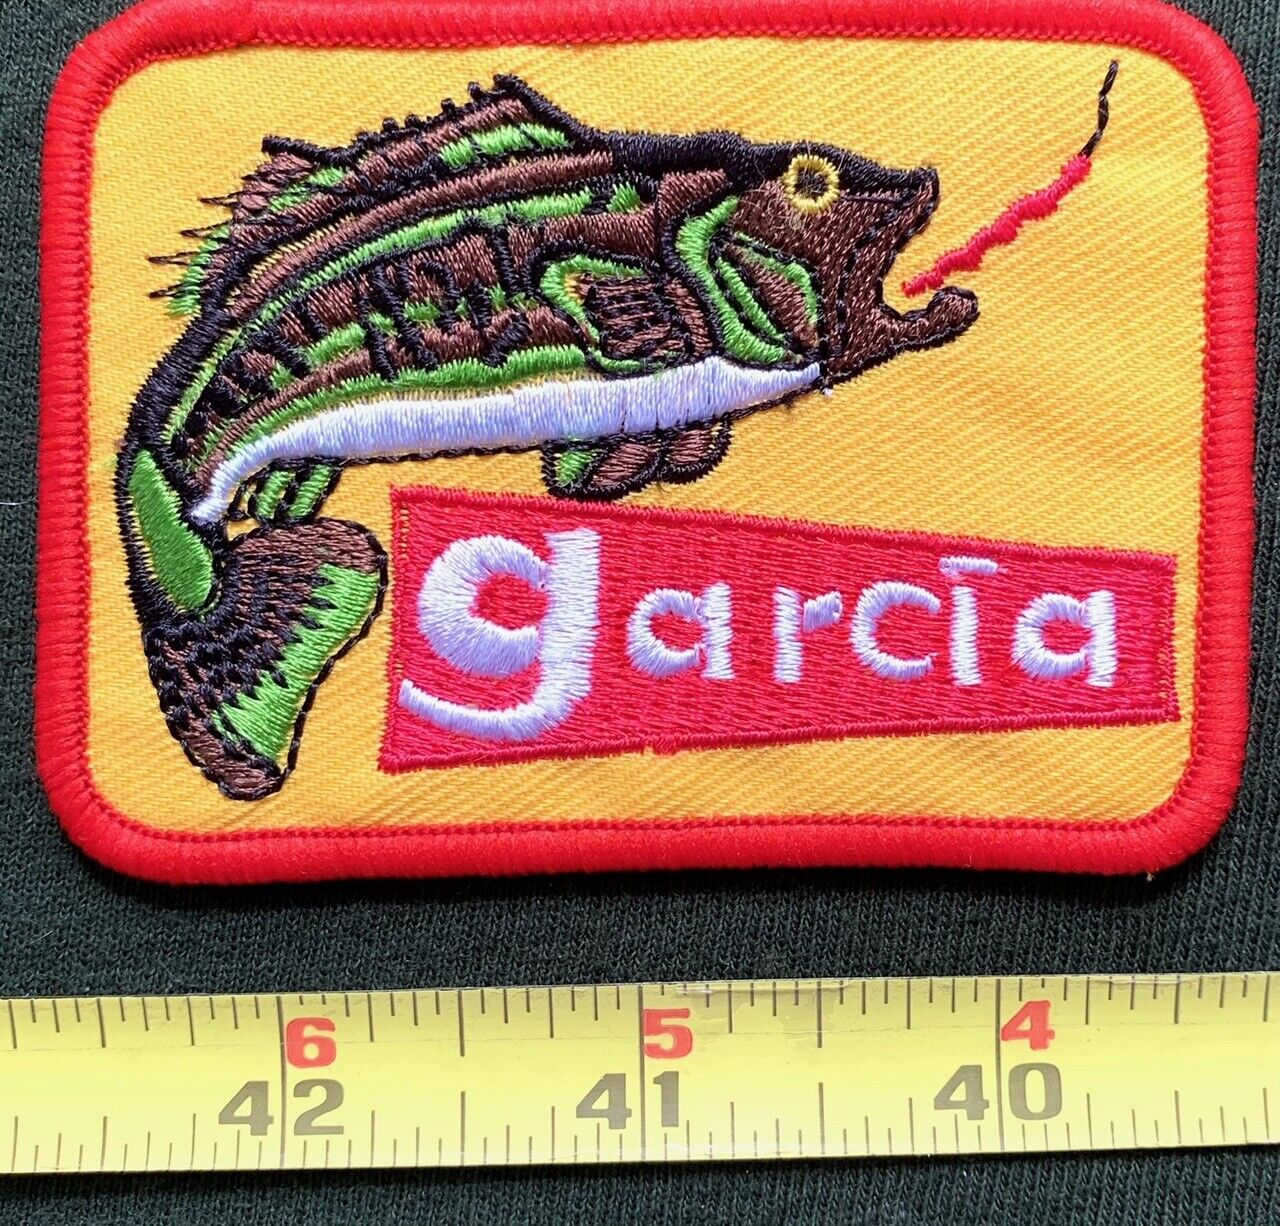 VINTAGE GARCIA FISHING REEL SEW ON COLLECTORS PATCH